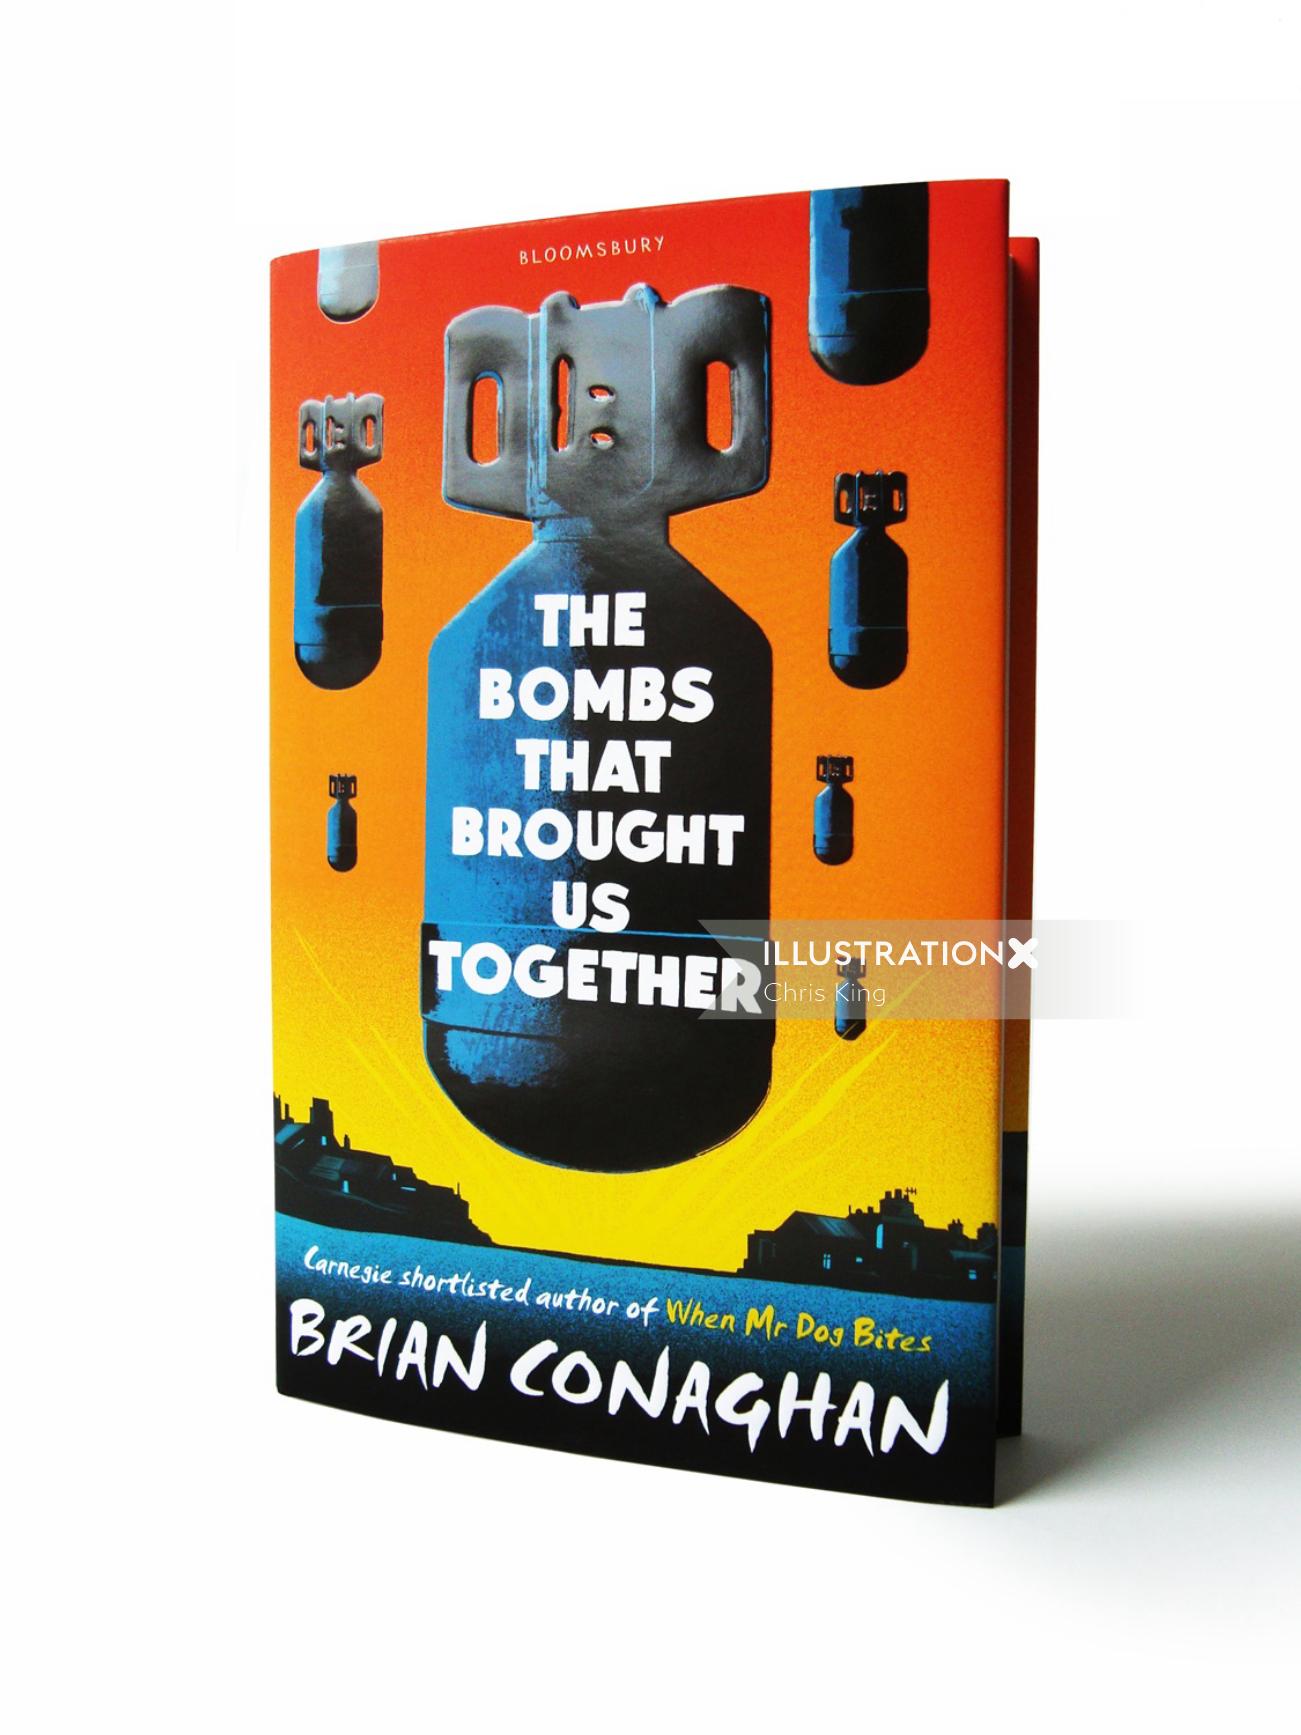 An illustration of cover for the bombs